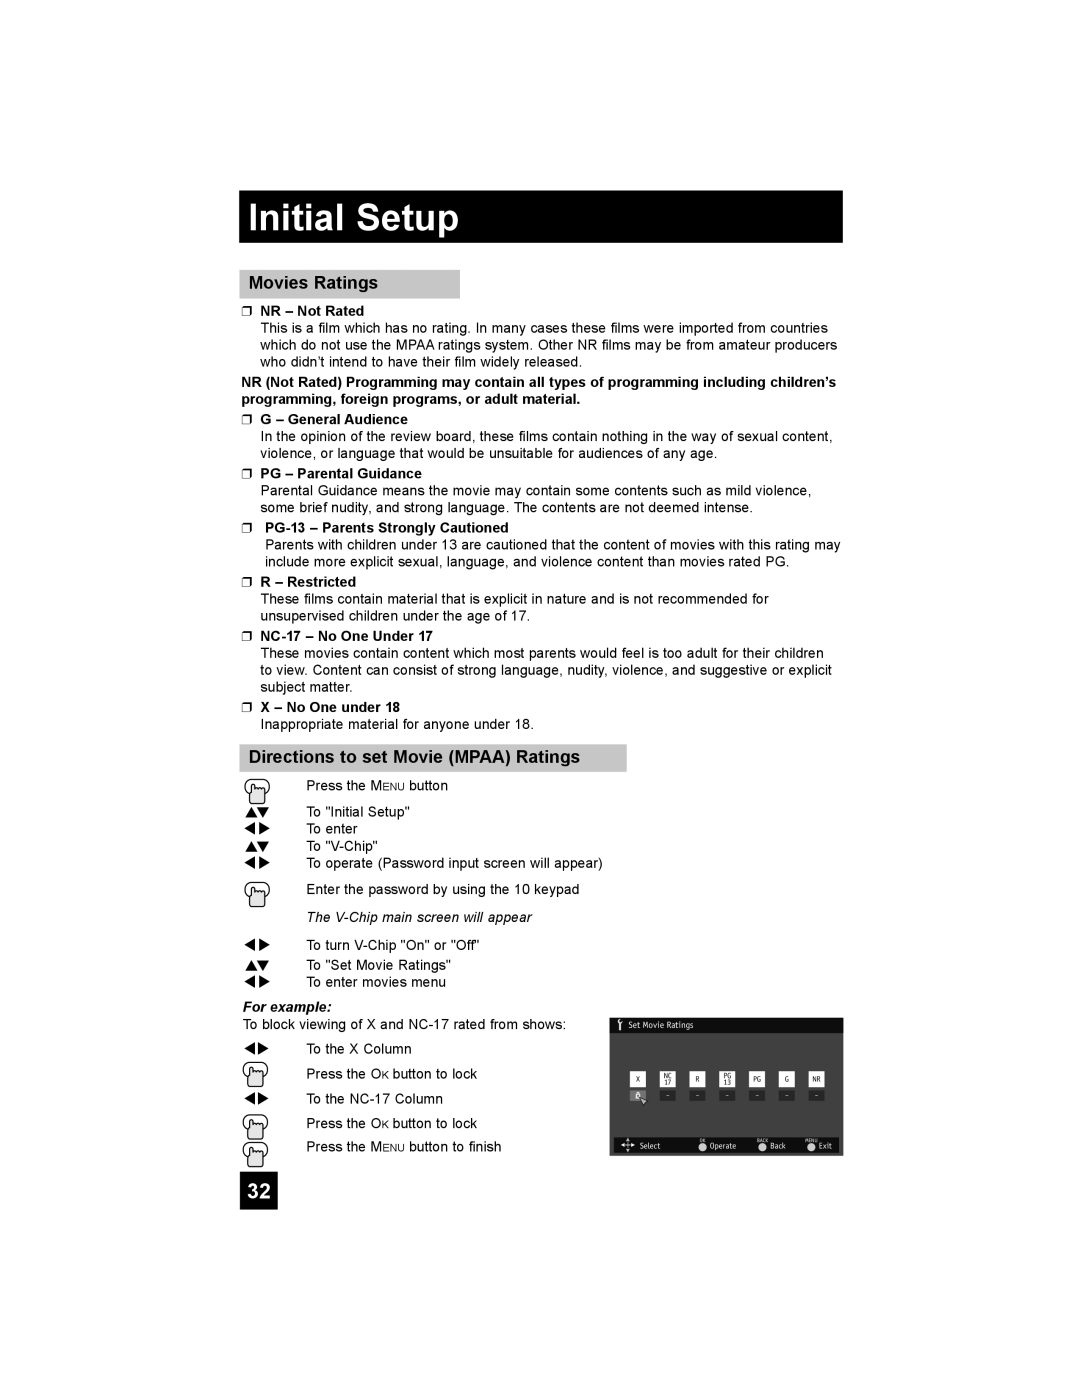 JVC LT-42X688 manual Movies Ratings, Directions to set Movie MPAA Ratings, For example, Press the MENU button to finish 